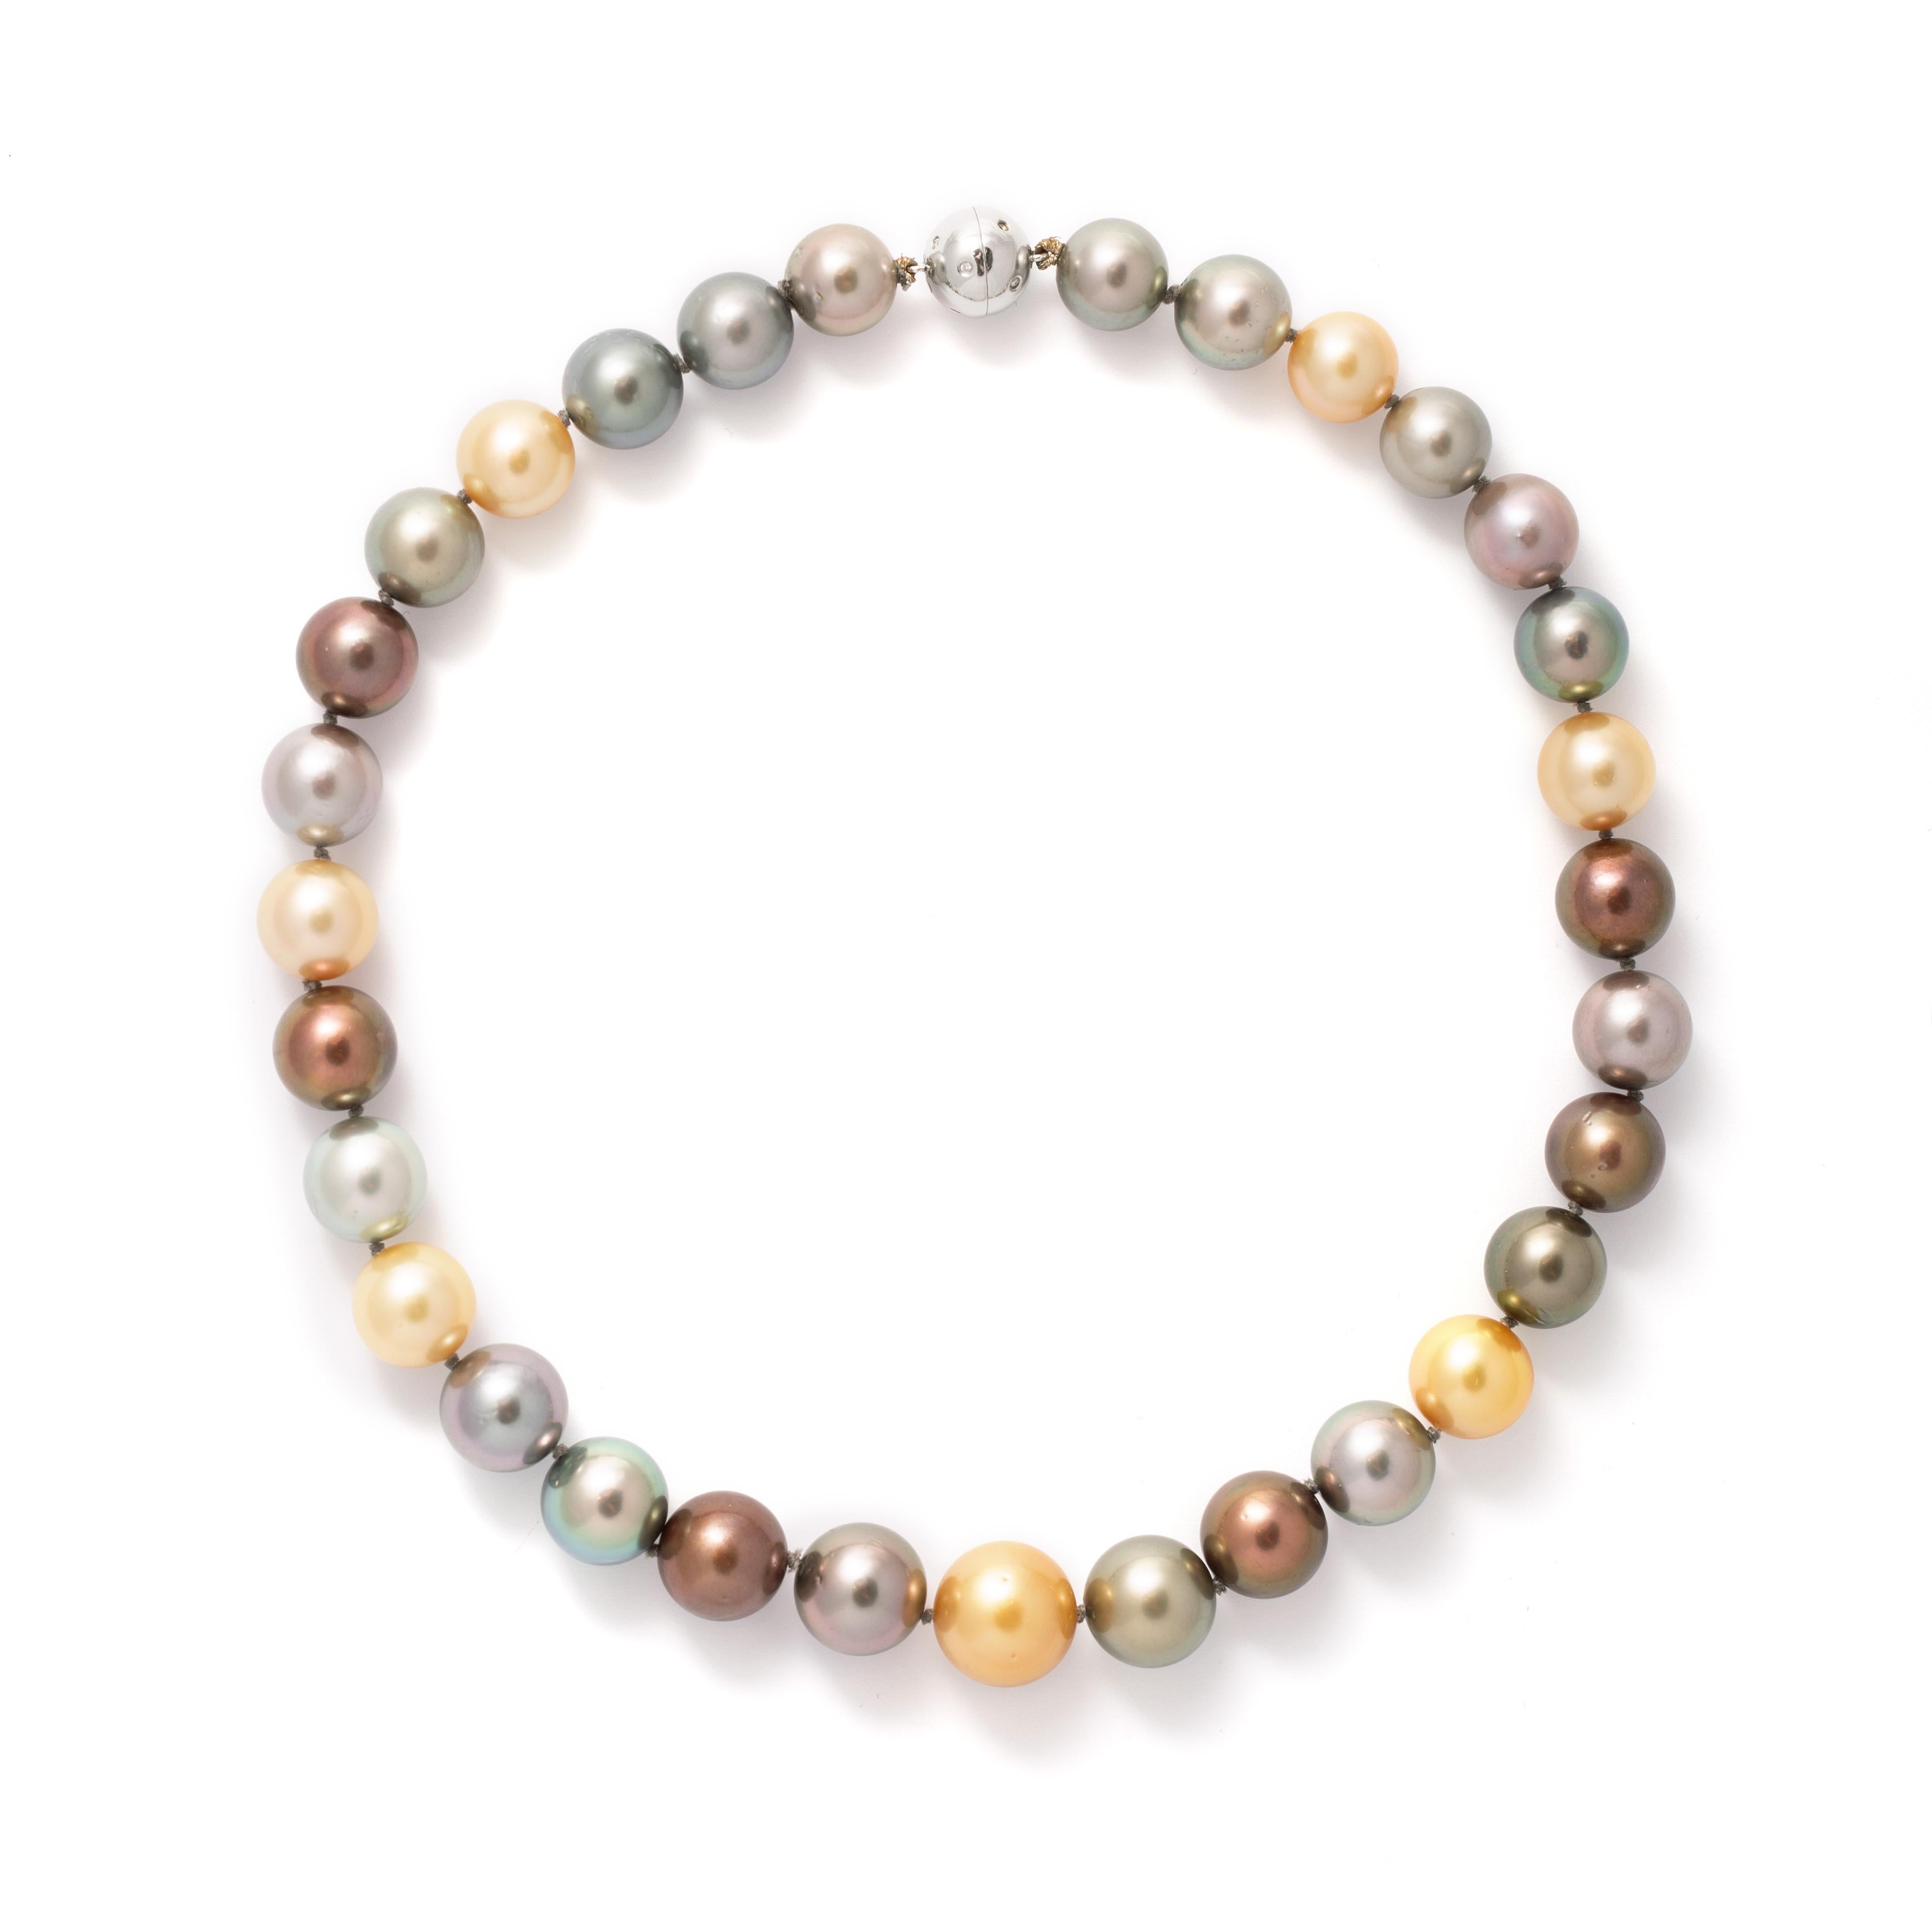 Colored Cultured Pearl White Gold and Diamond clasp Necklace.

Total length: 18.11 inches (46.00 centimeters).
Total weight: 103.83 grams.
